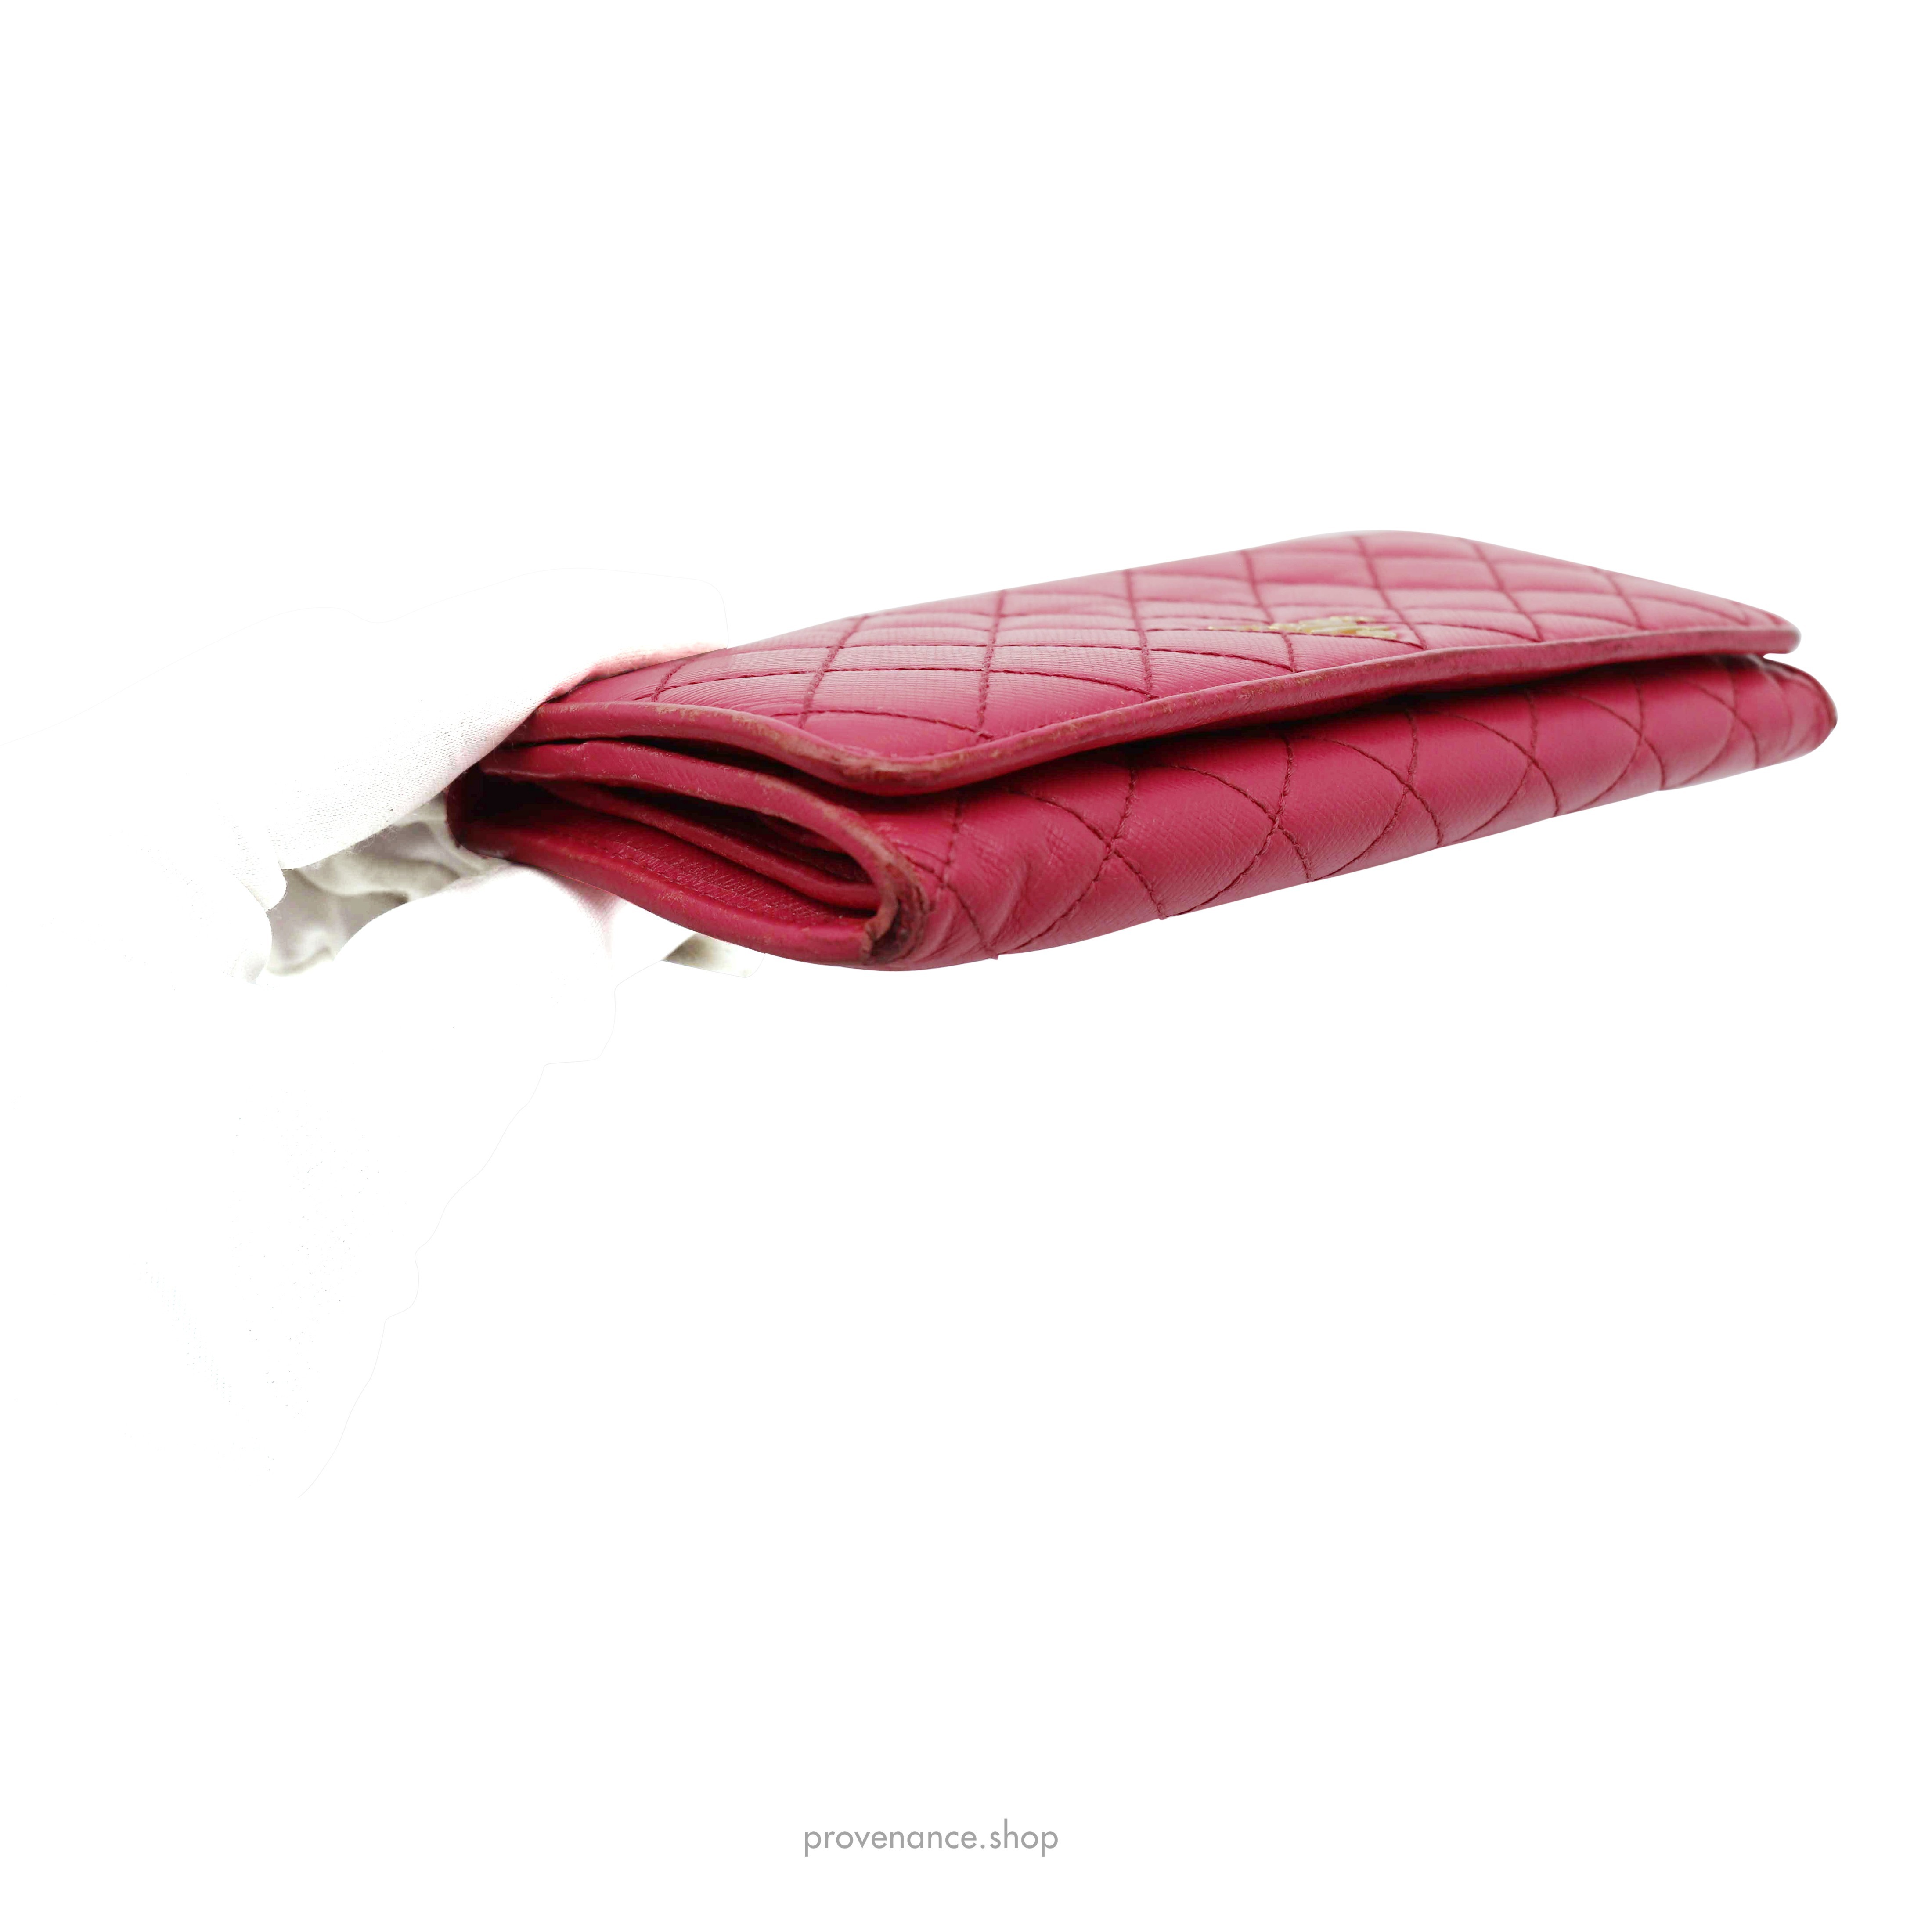 Prada Long Wallet - Pink Quilted Saffiano Leather - 9